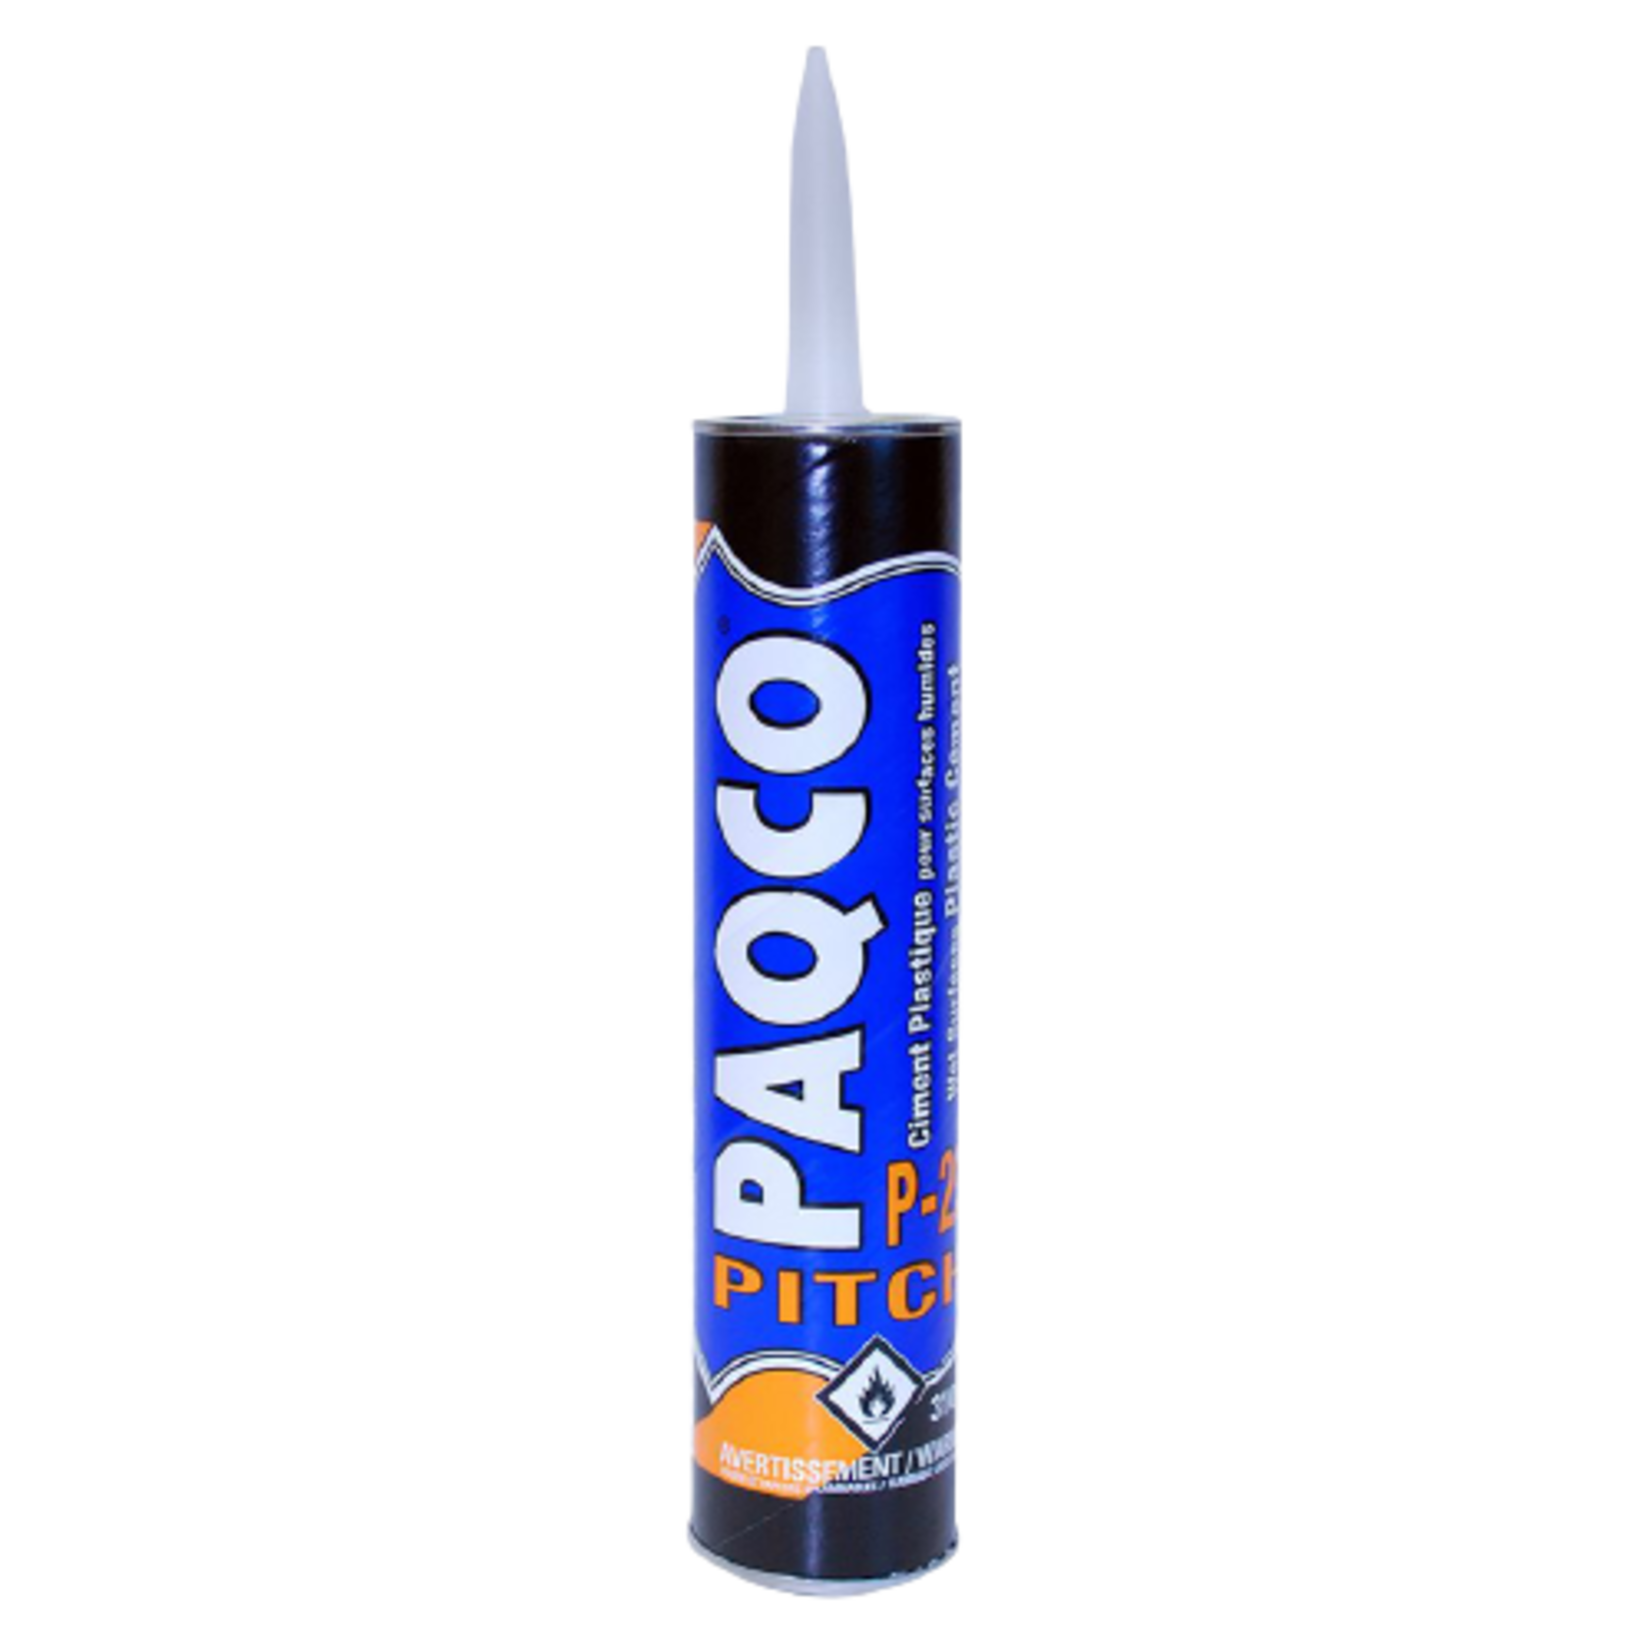 PAQCO PITCH ROOF CEMENT 300ML